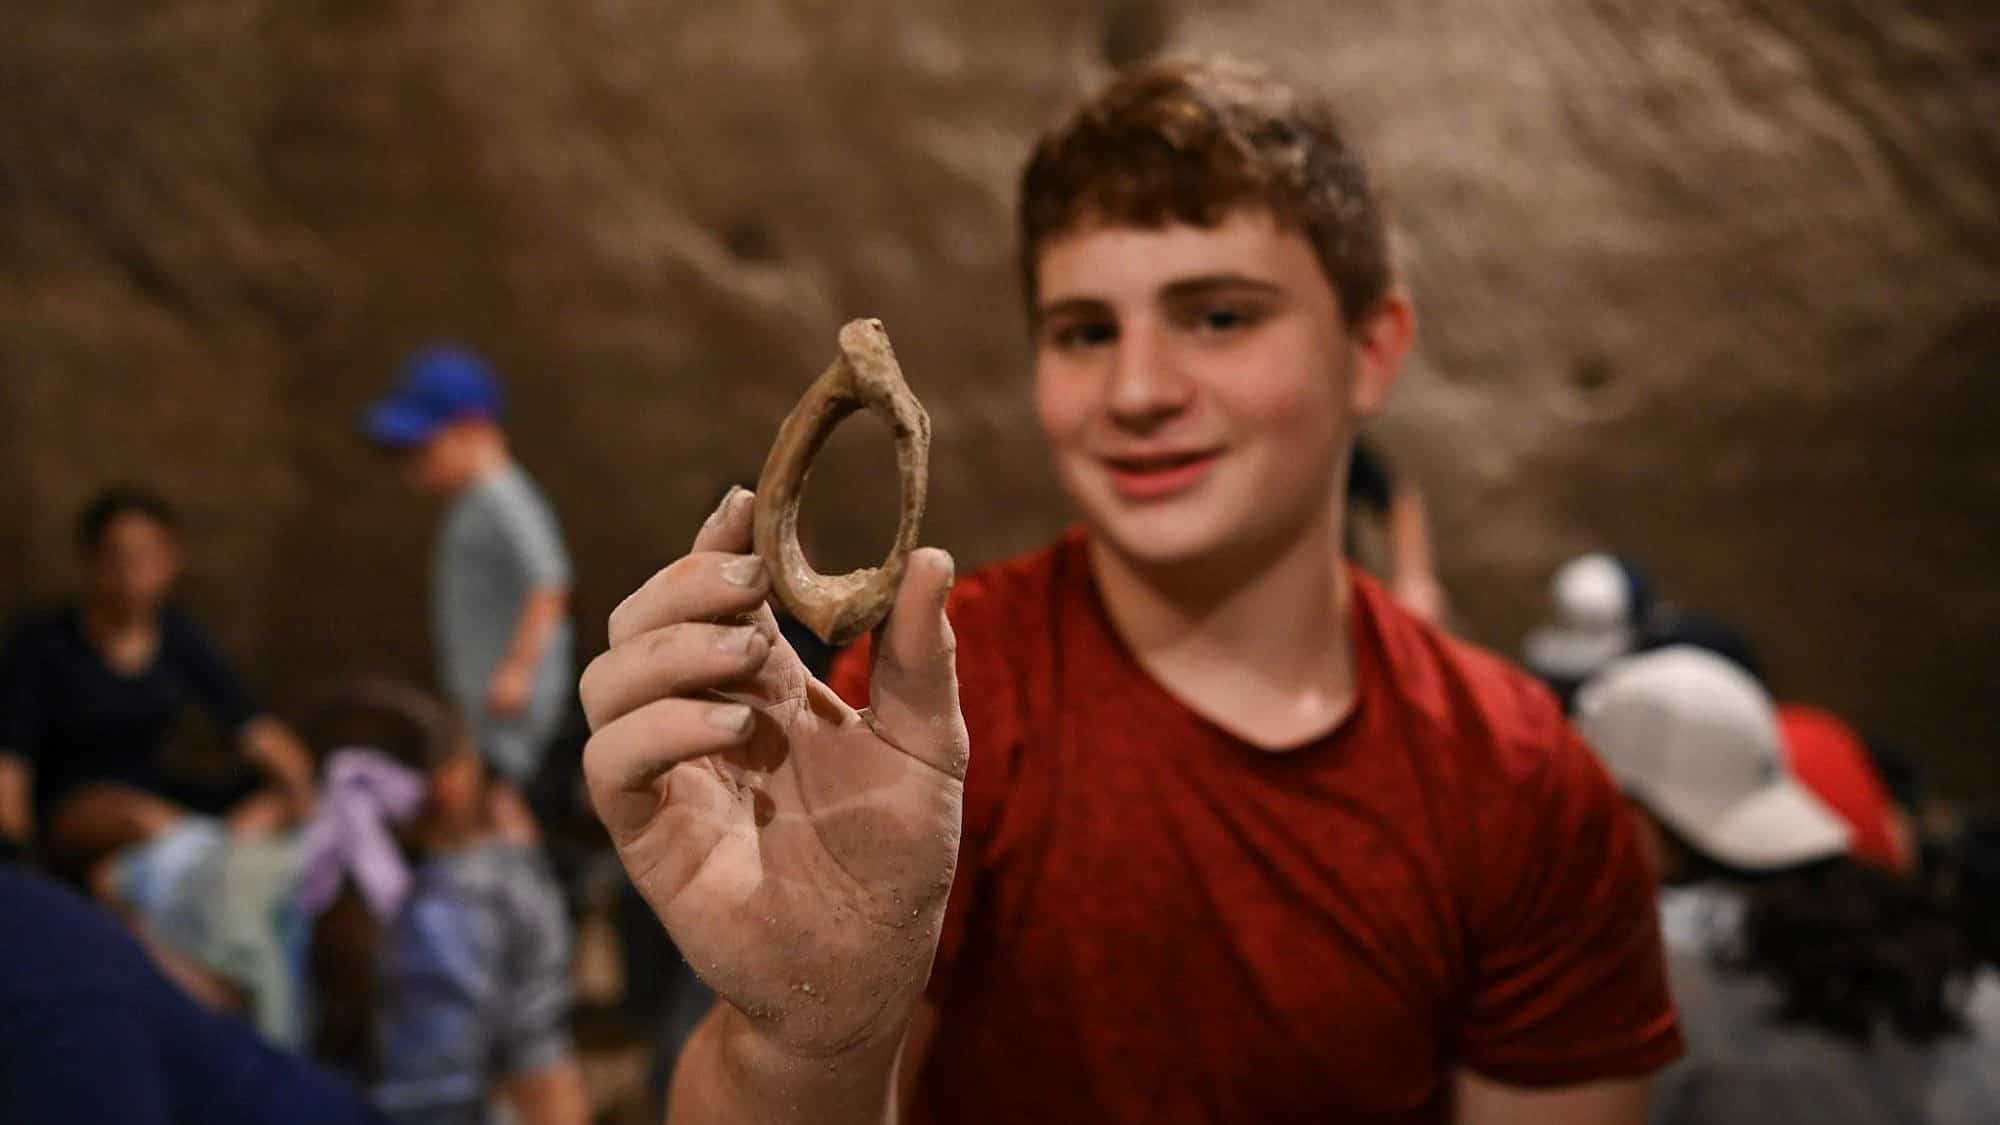 Kids participate in an archeological dig at Tel Maresha in Beit Guvrin, a UNESCO World Heritage Site in Israel’s Lachish region, Aug. 7, 2023. Photo by Yoav Dudkevitch/TPS.